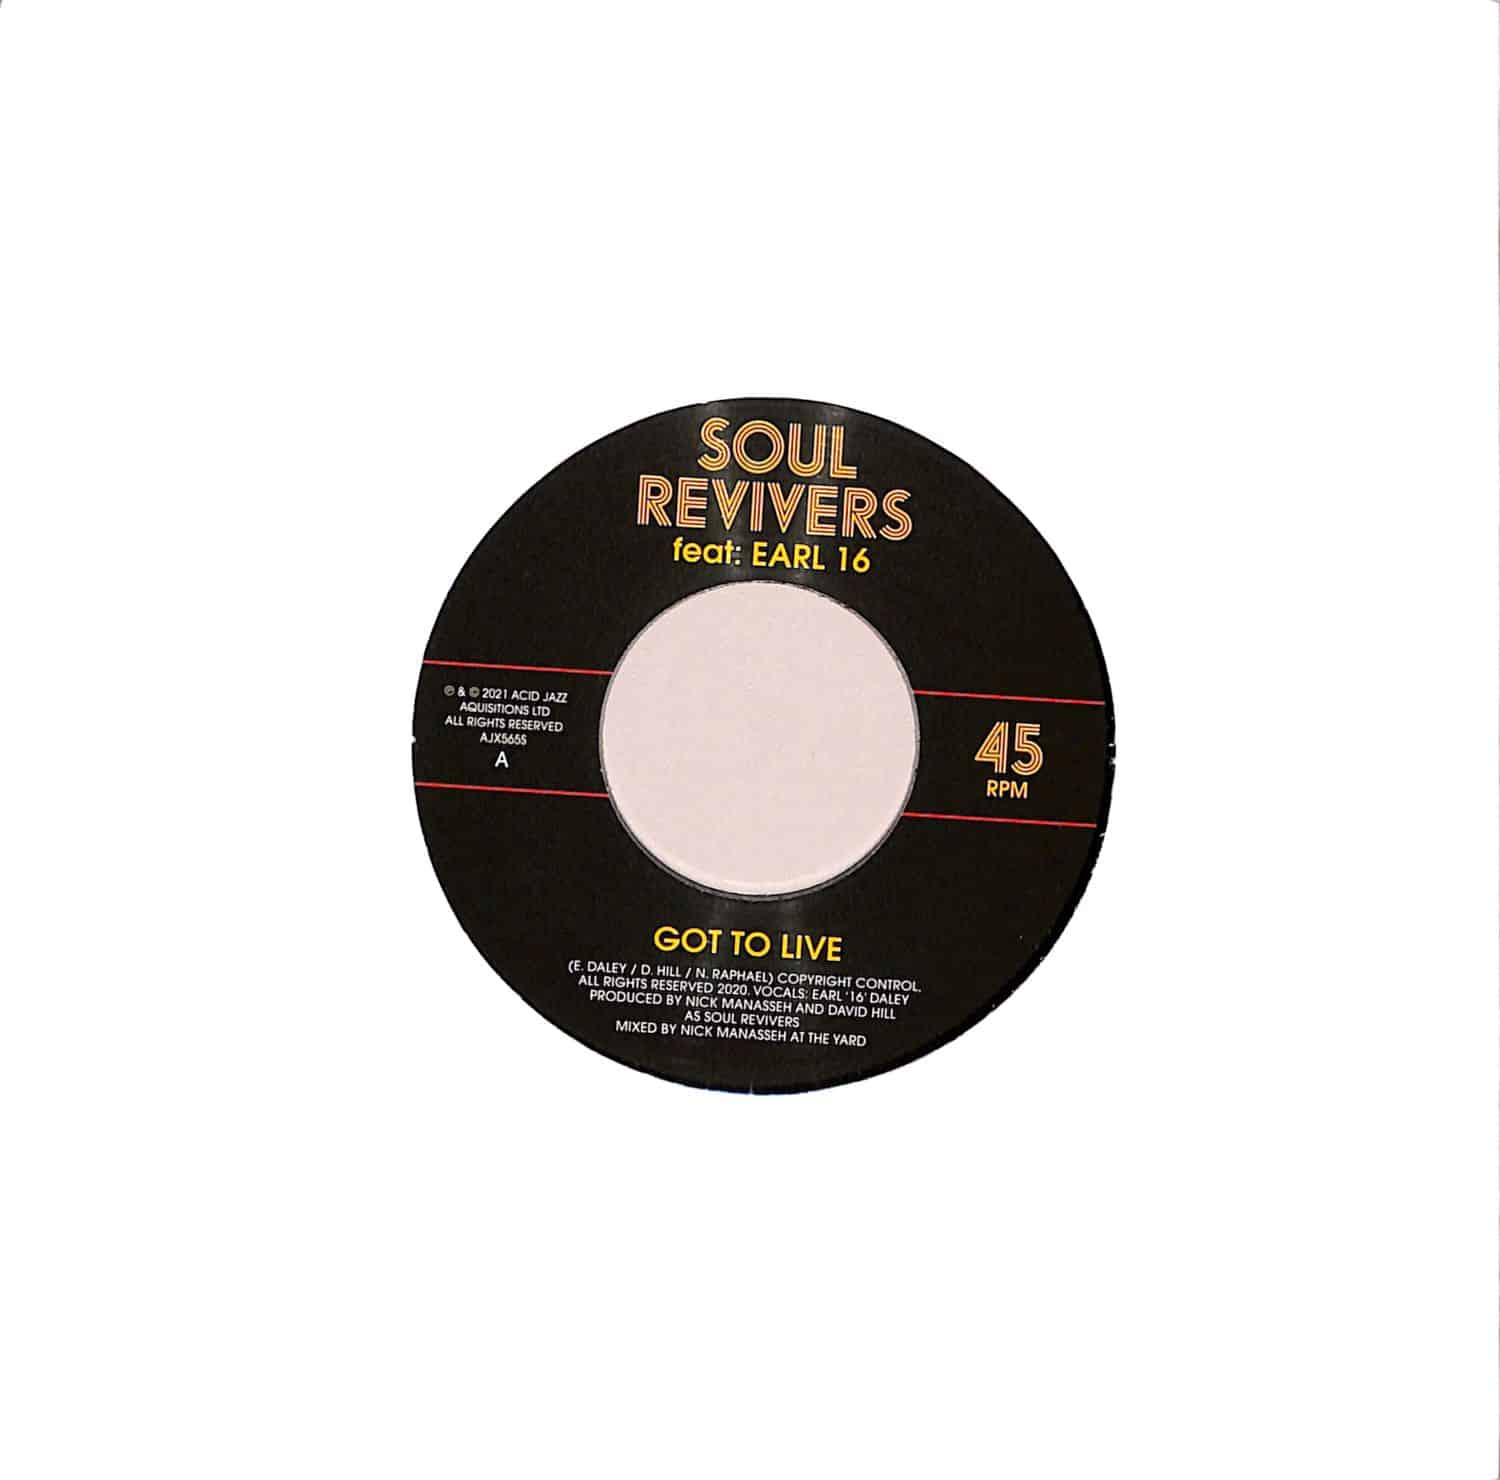 Soul Revivers ft. Earl 16 - GOT TO LIVE 